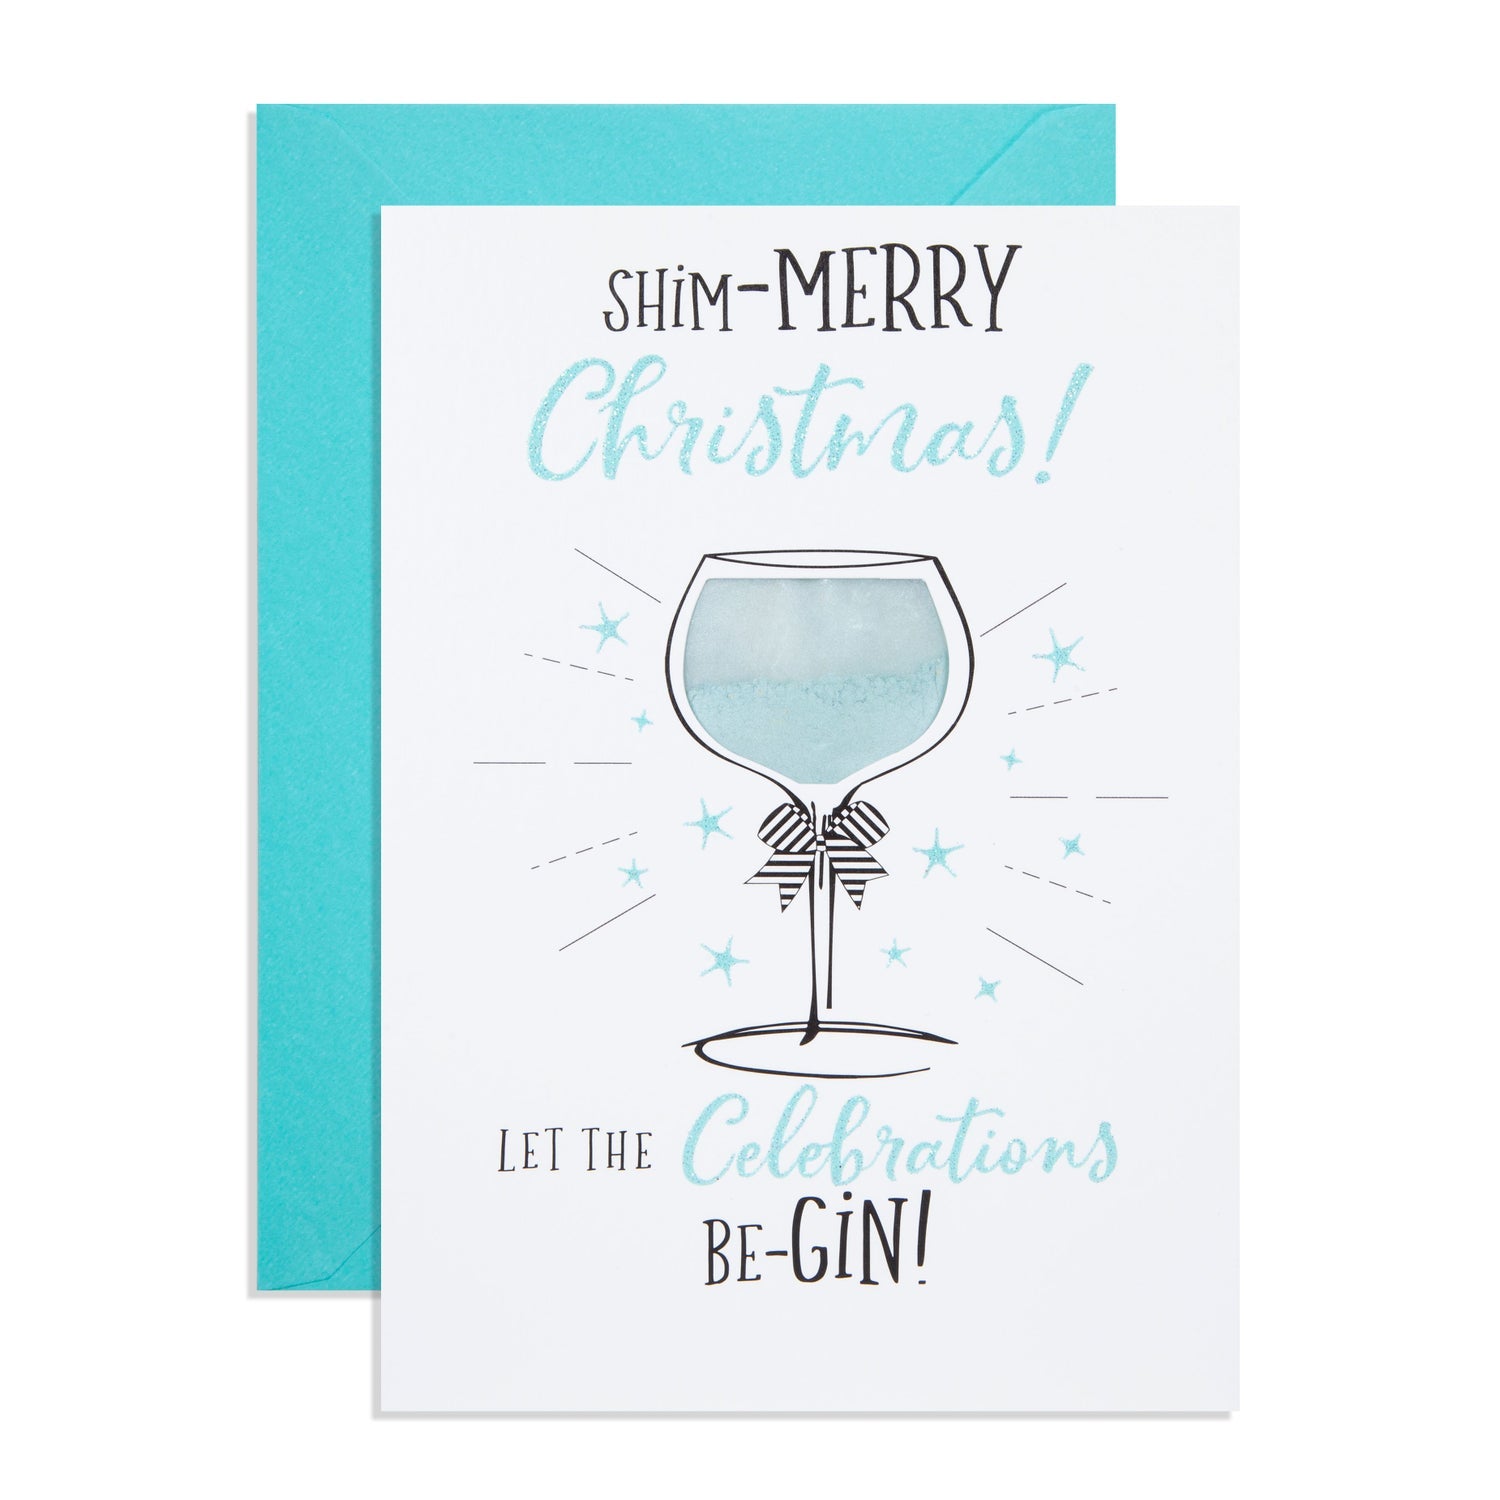 Shim-Merry Christmas. Let the Celebrations BeGIN! - contains Aqua Blue Silk drinks shimmer